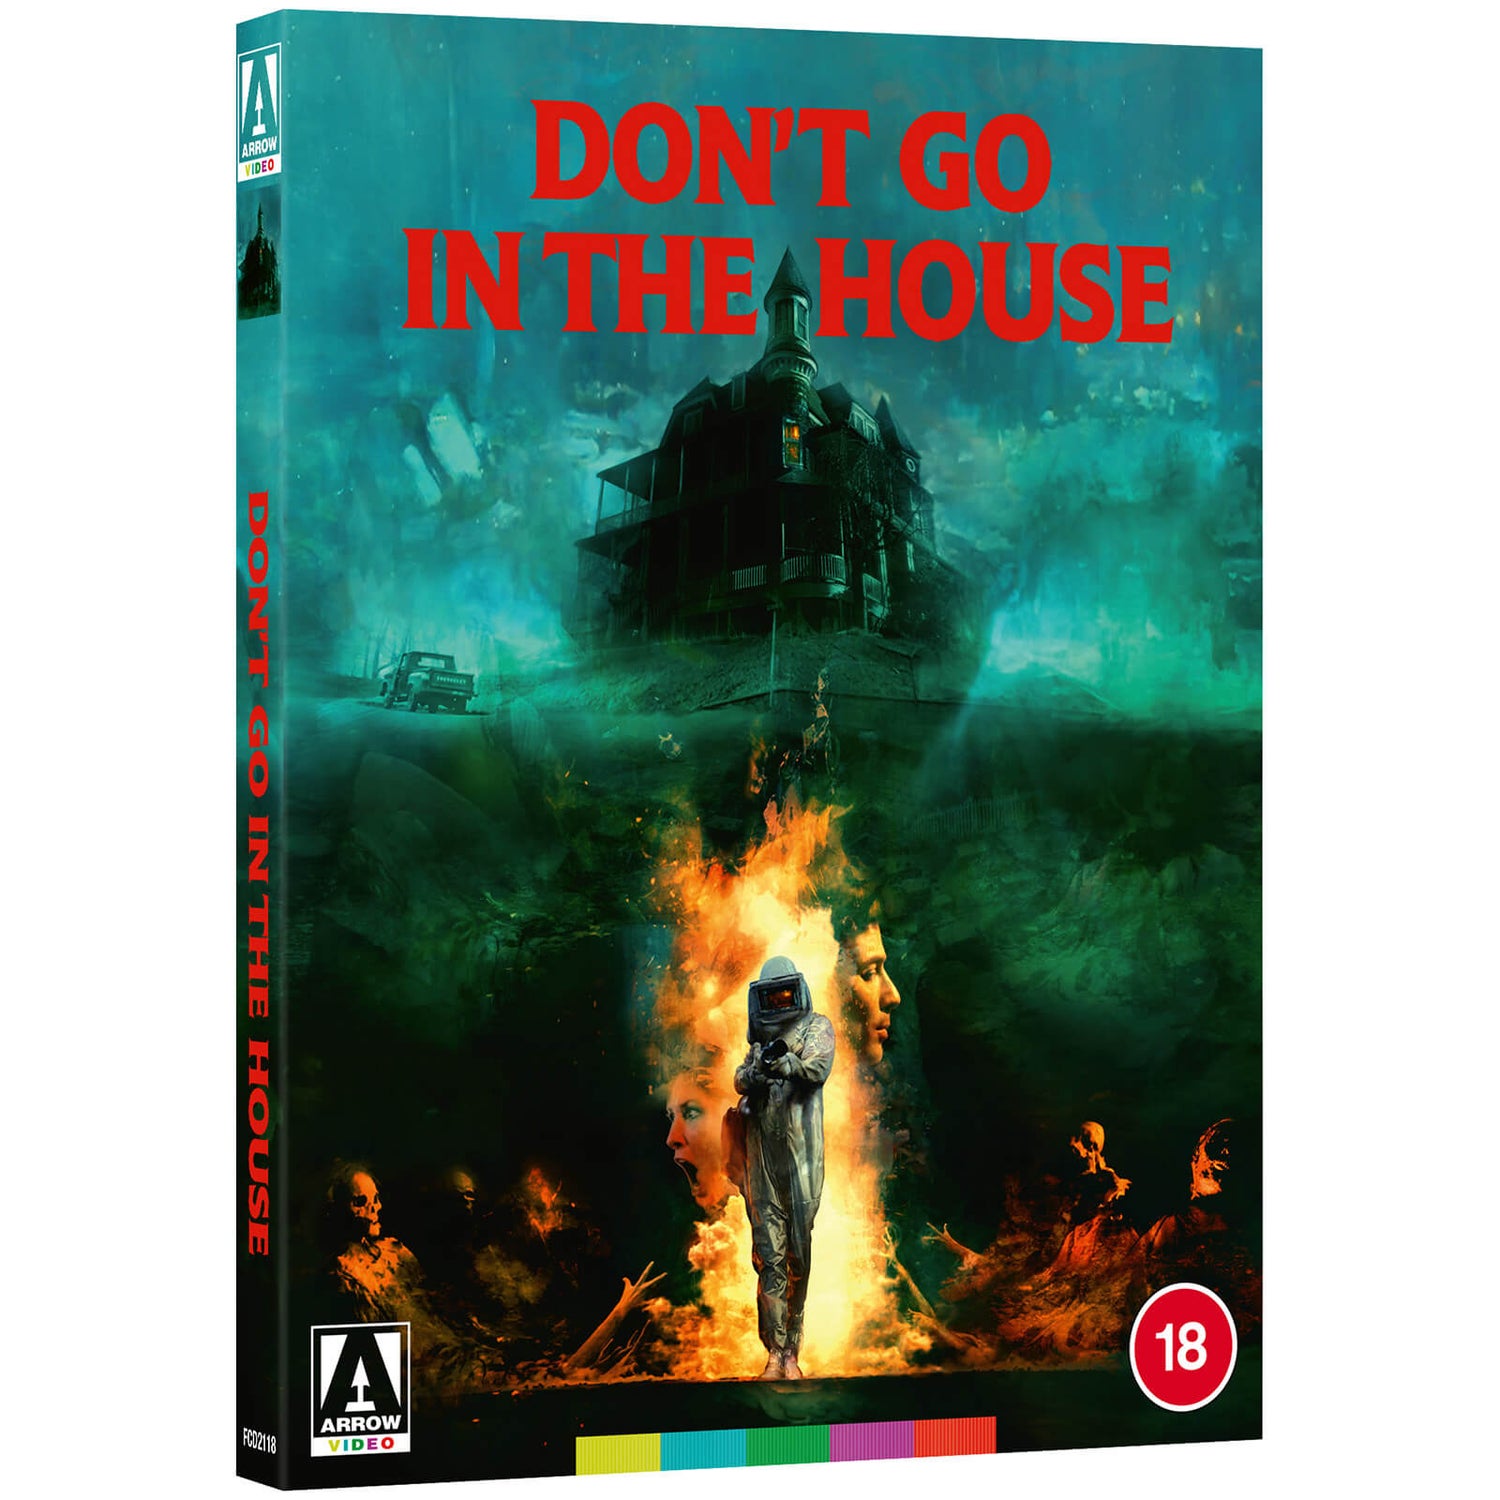 Don't Go In The House Limited Edition Blu-ray